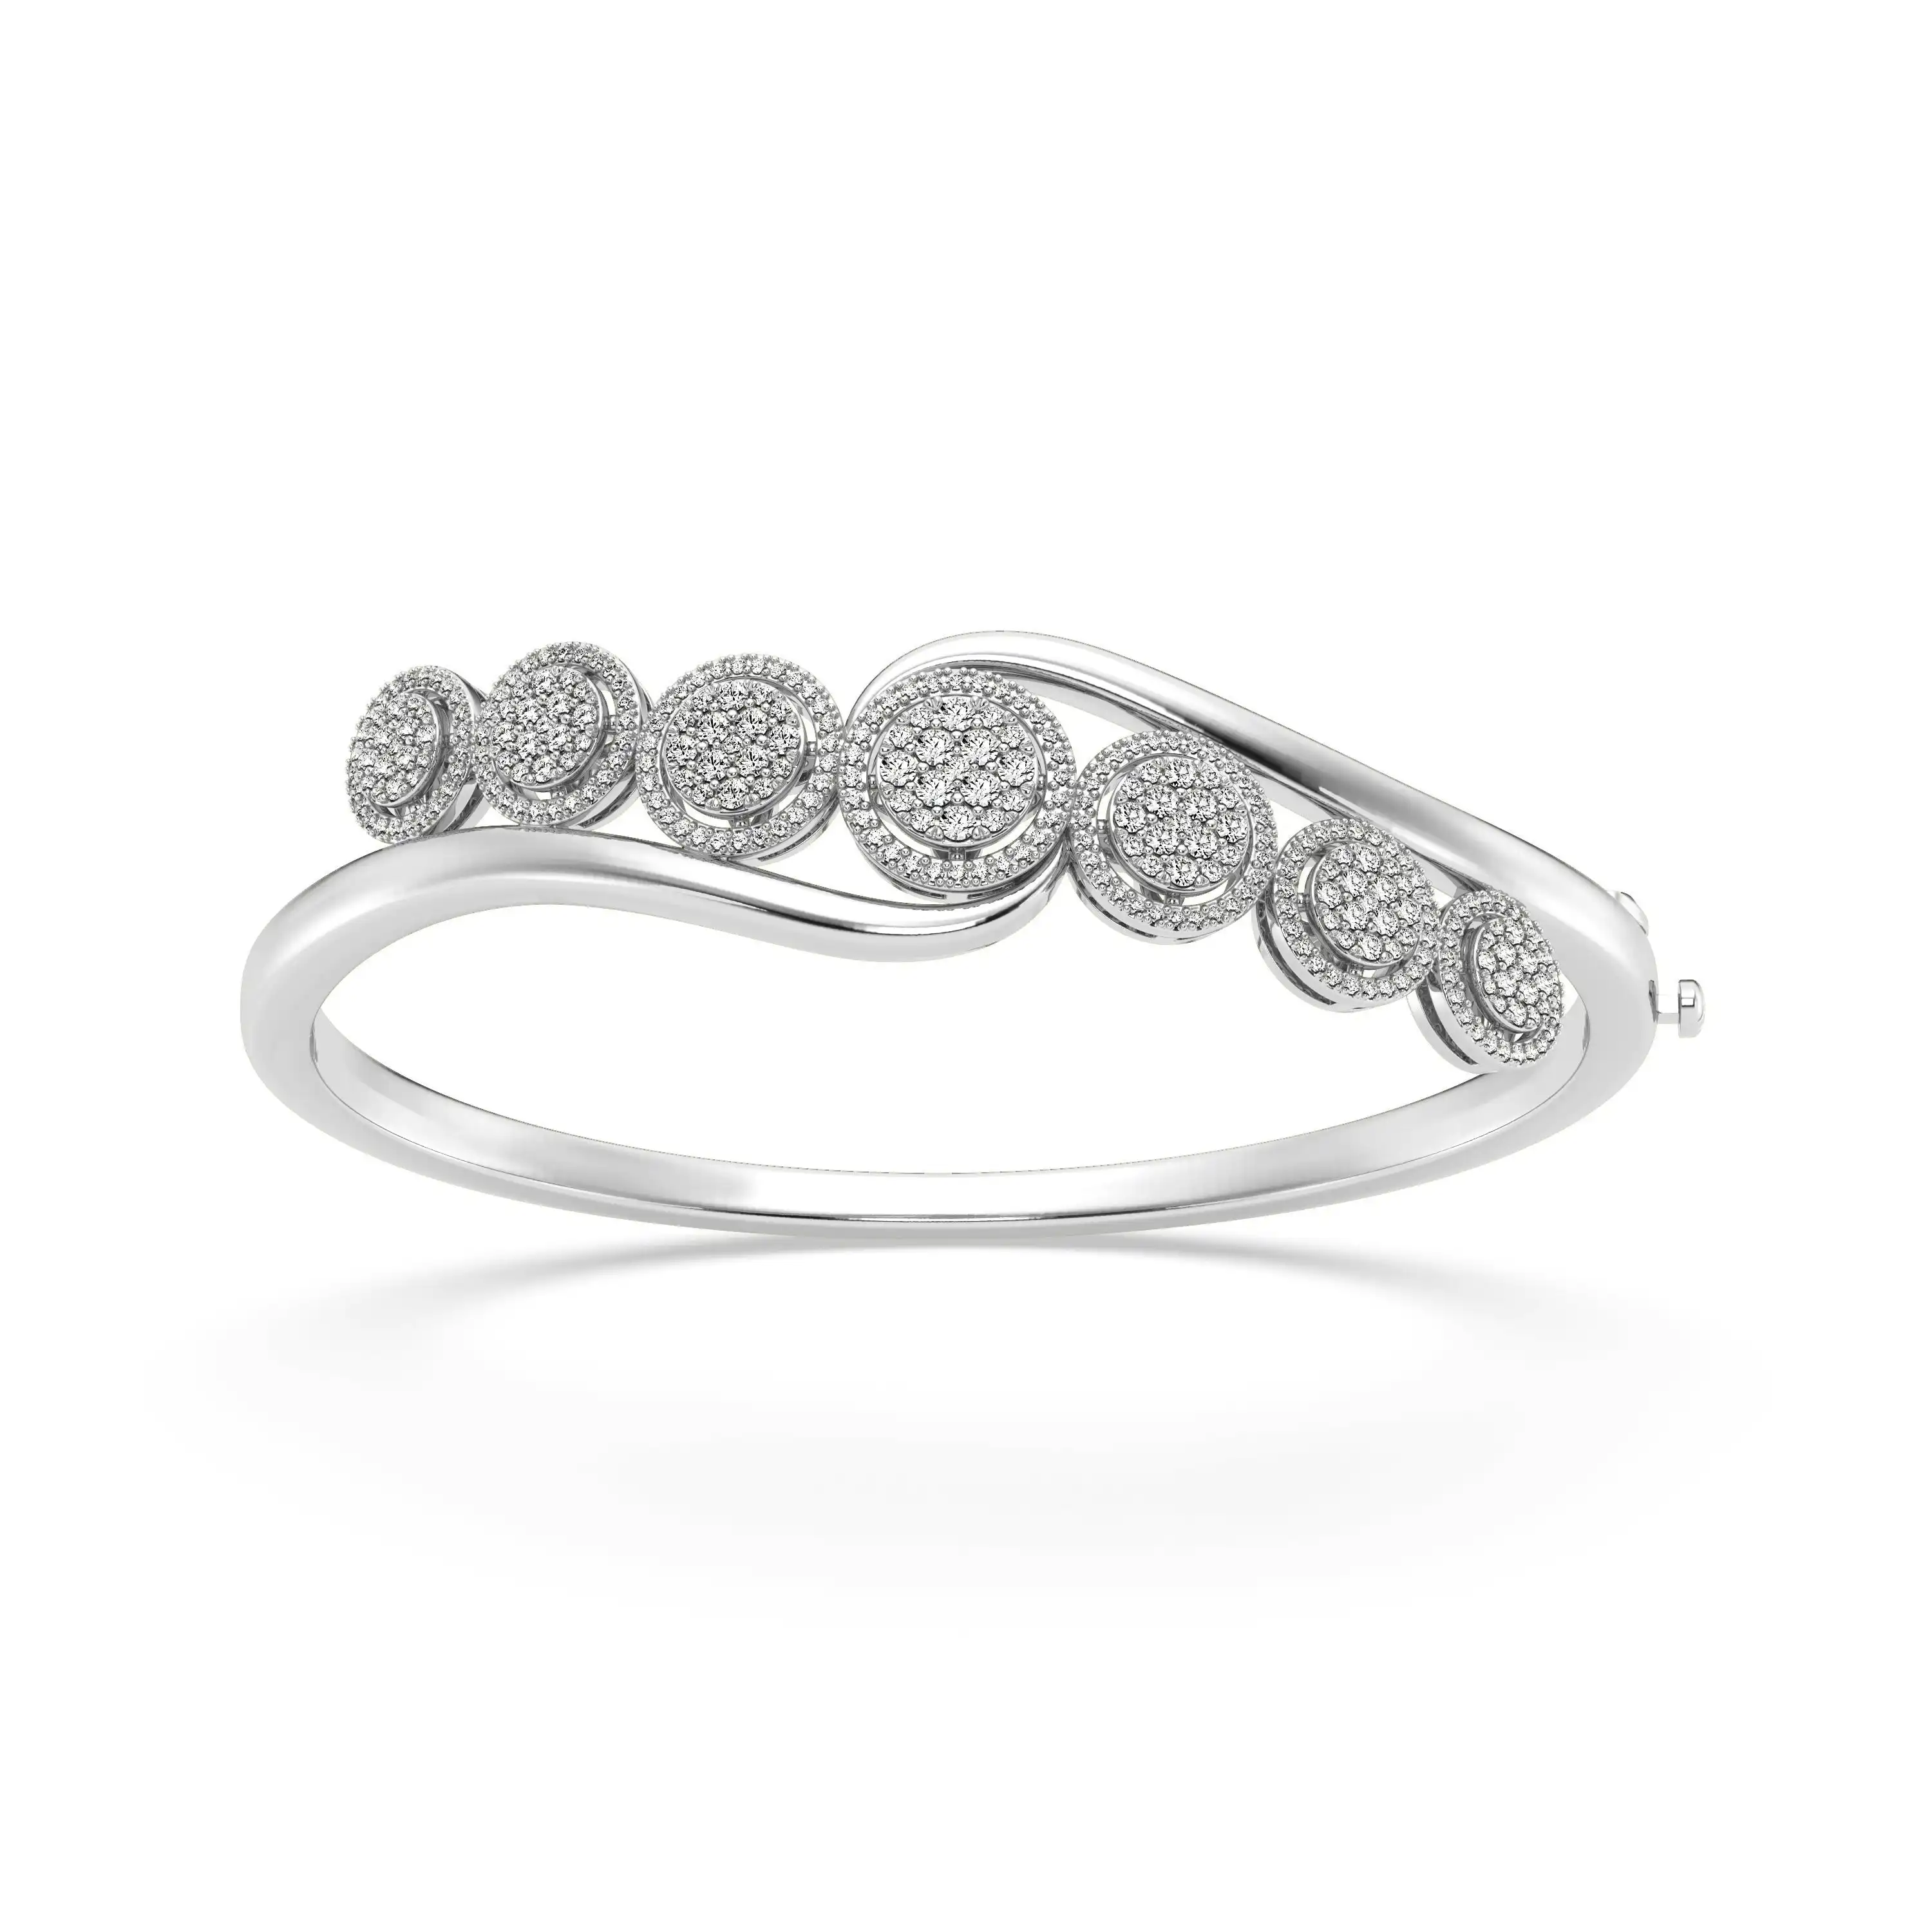 Mirage Halo Bangle with 1.50ct of Laboratory Grown Diamonds in Sterling Silver and Platinum